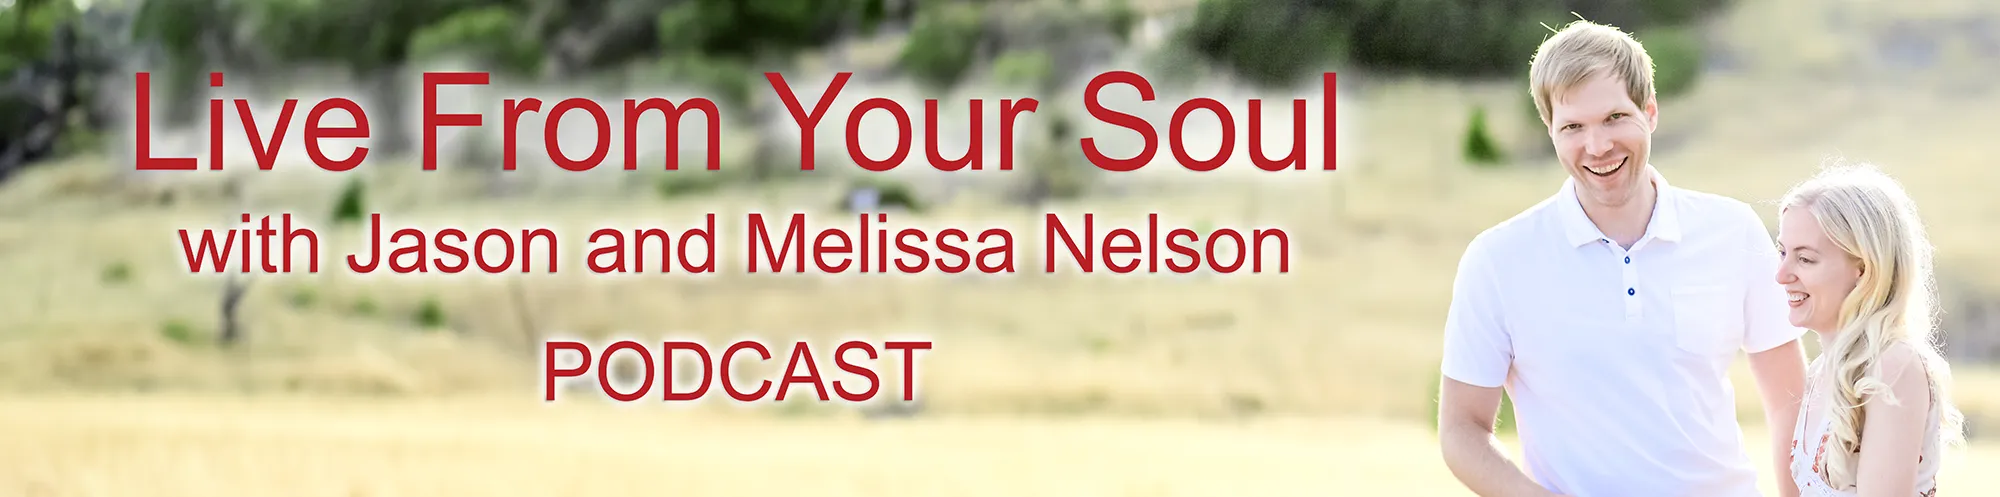 Live From Your Soul Podcast